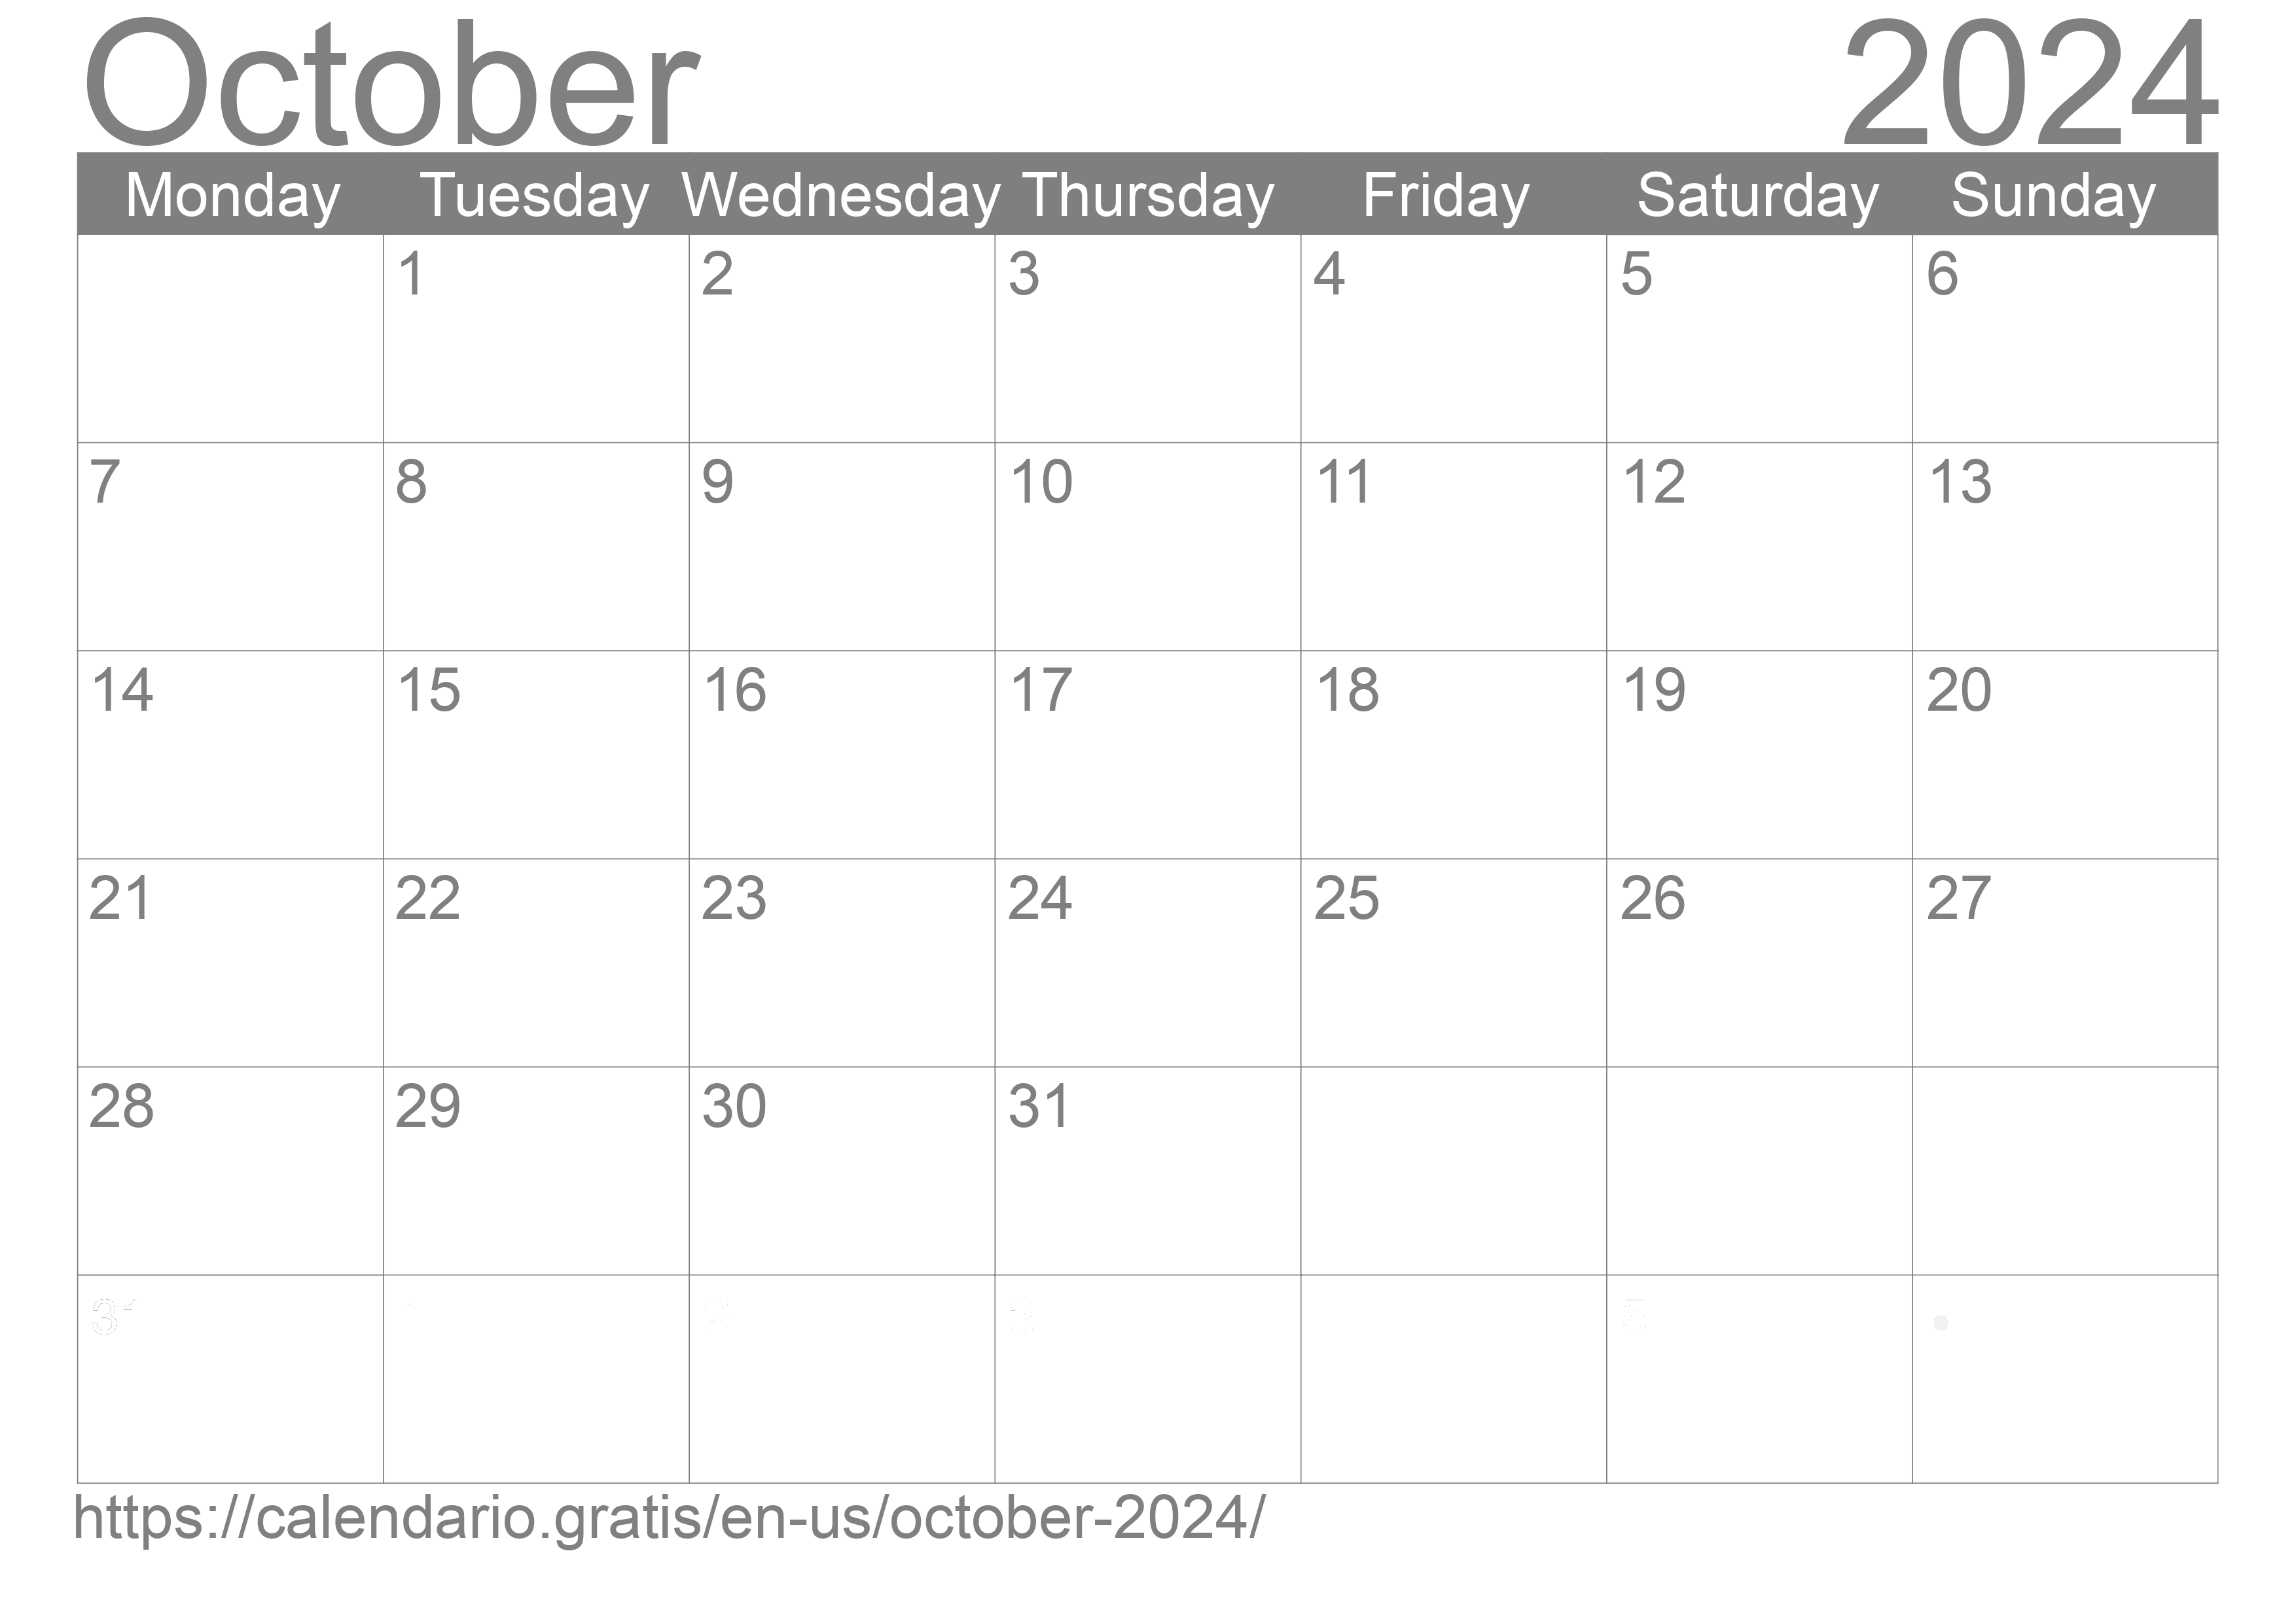 Calendar October 2024 from United States of America in English ☑️